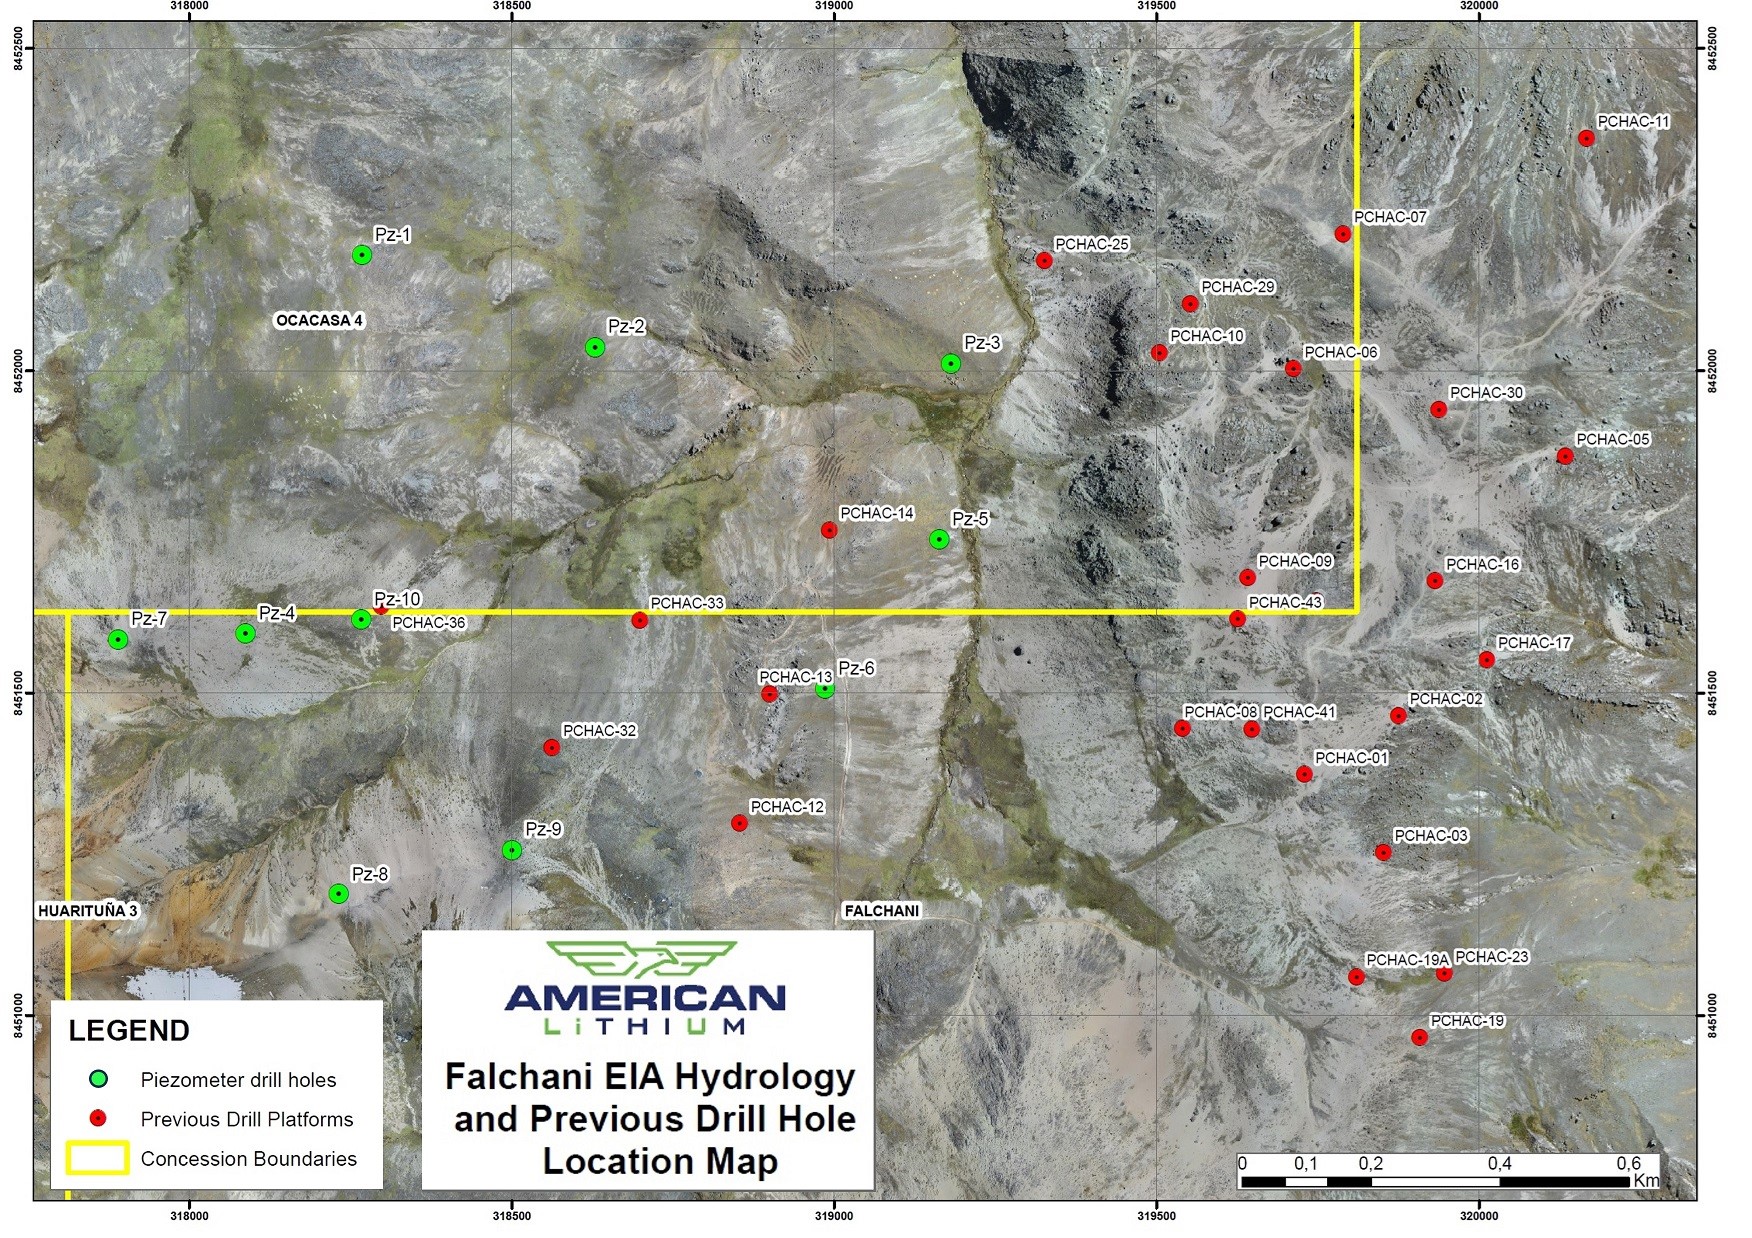 Updated Falchani EIA Hydrology and Previous Drill Hole Location Map